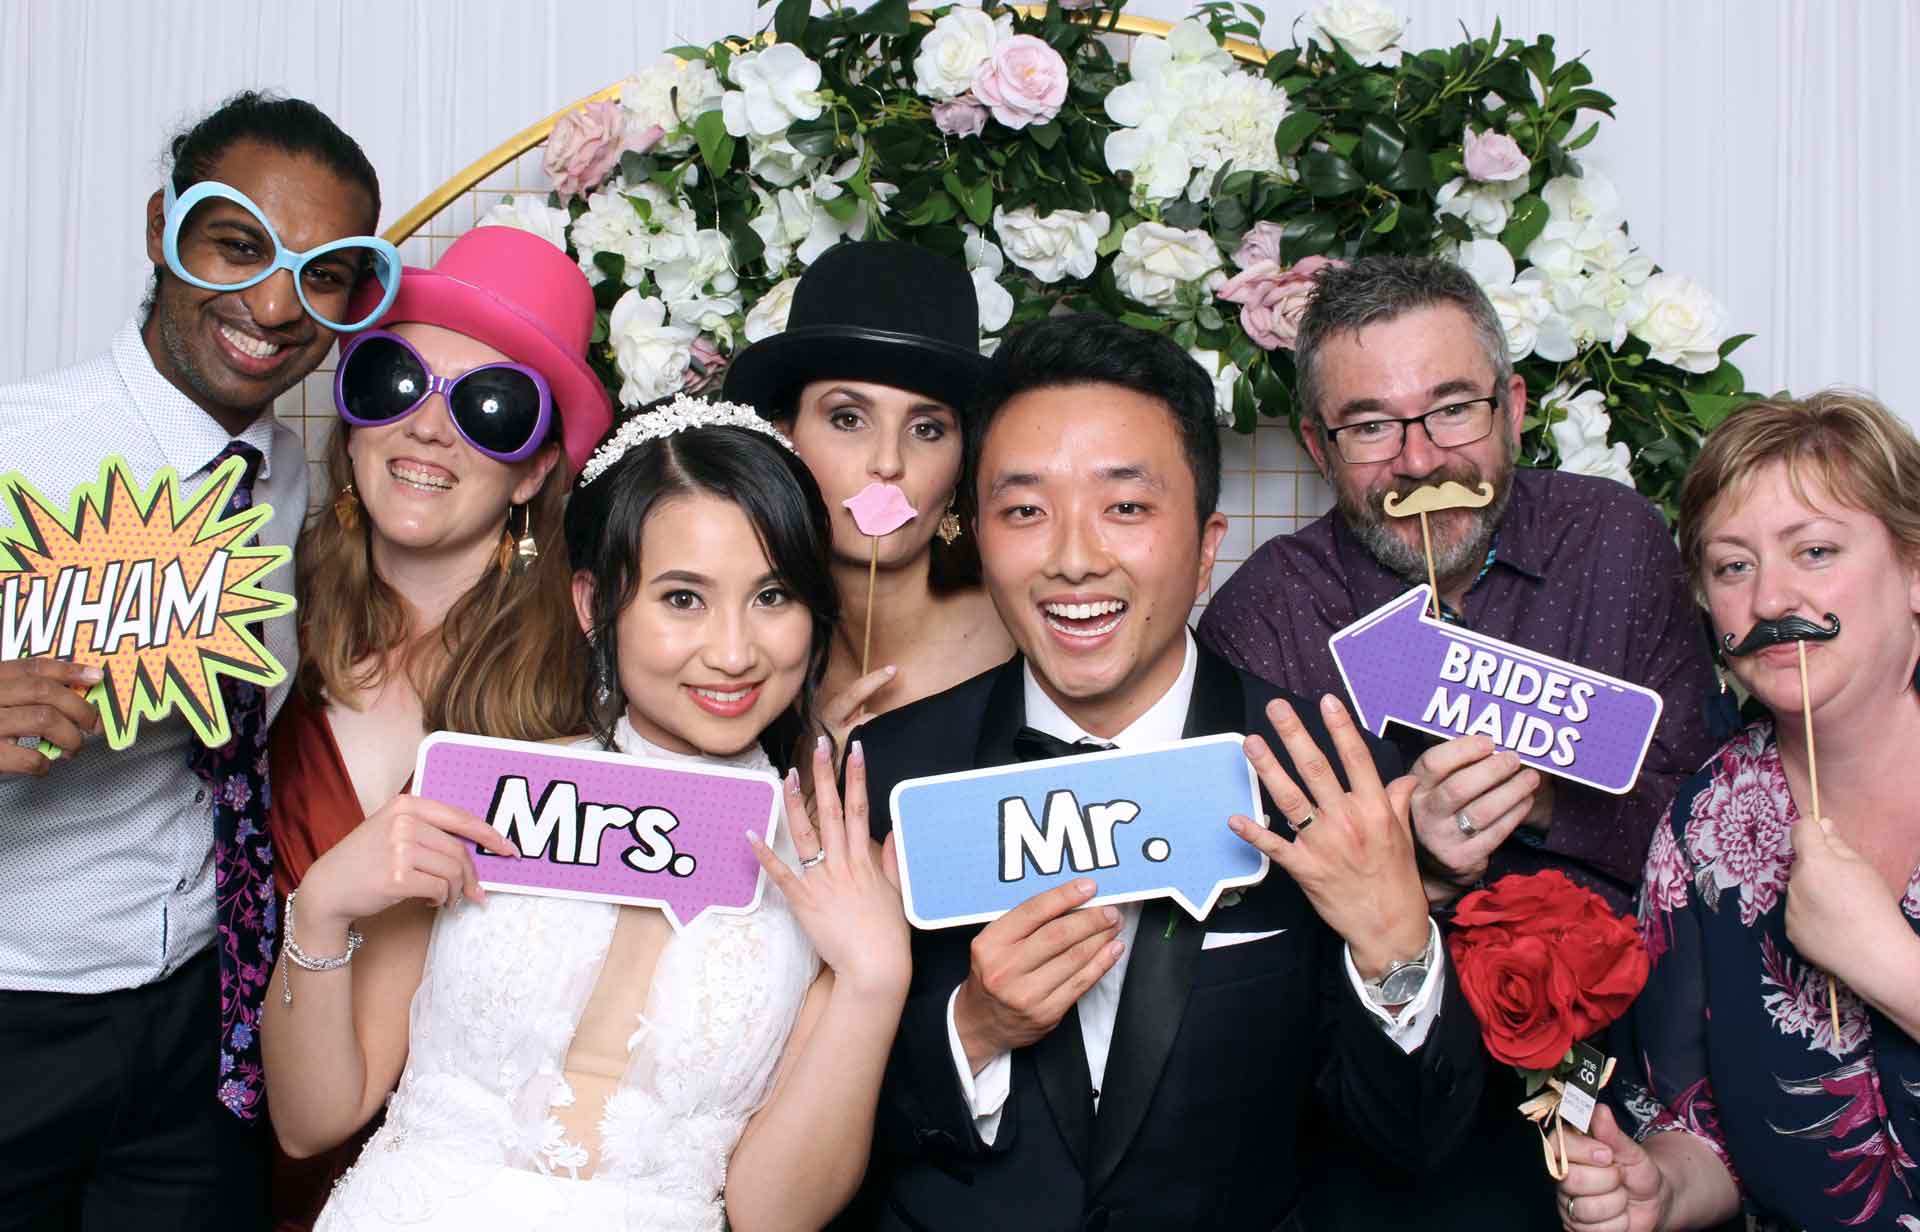 Oz Photo Booths - Photo Booth in a Wedding